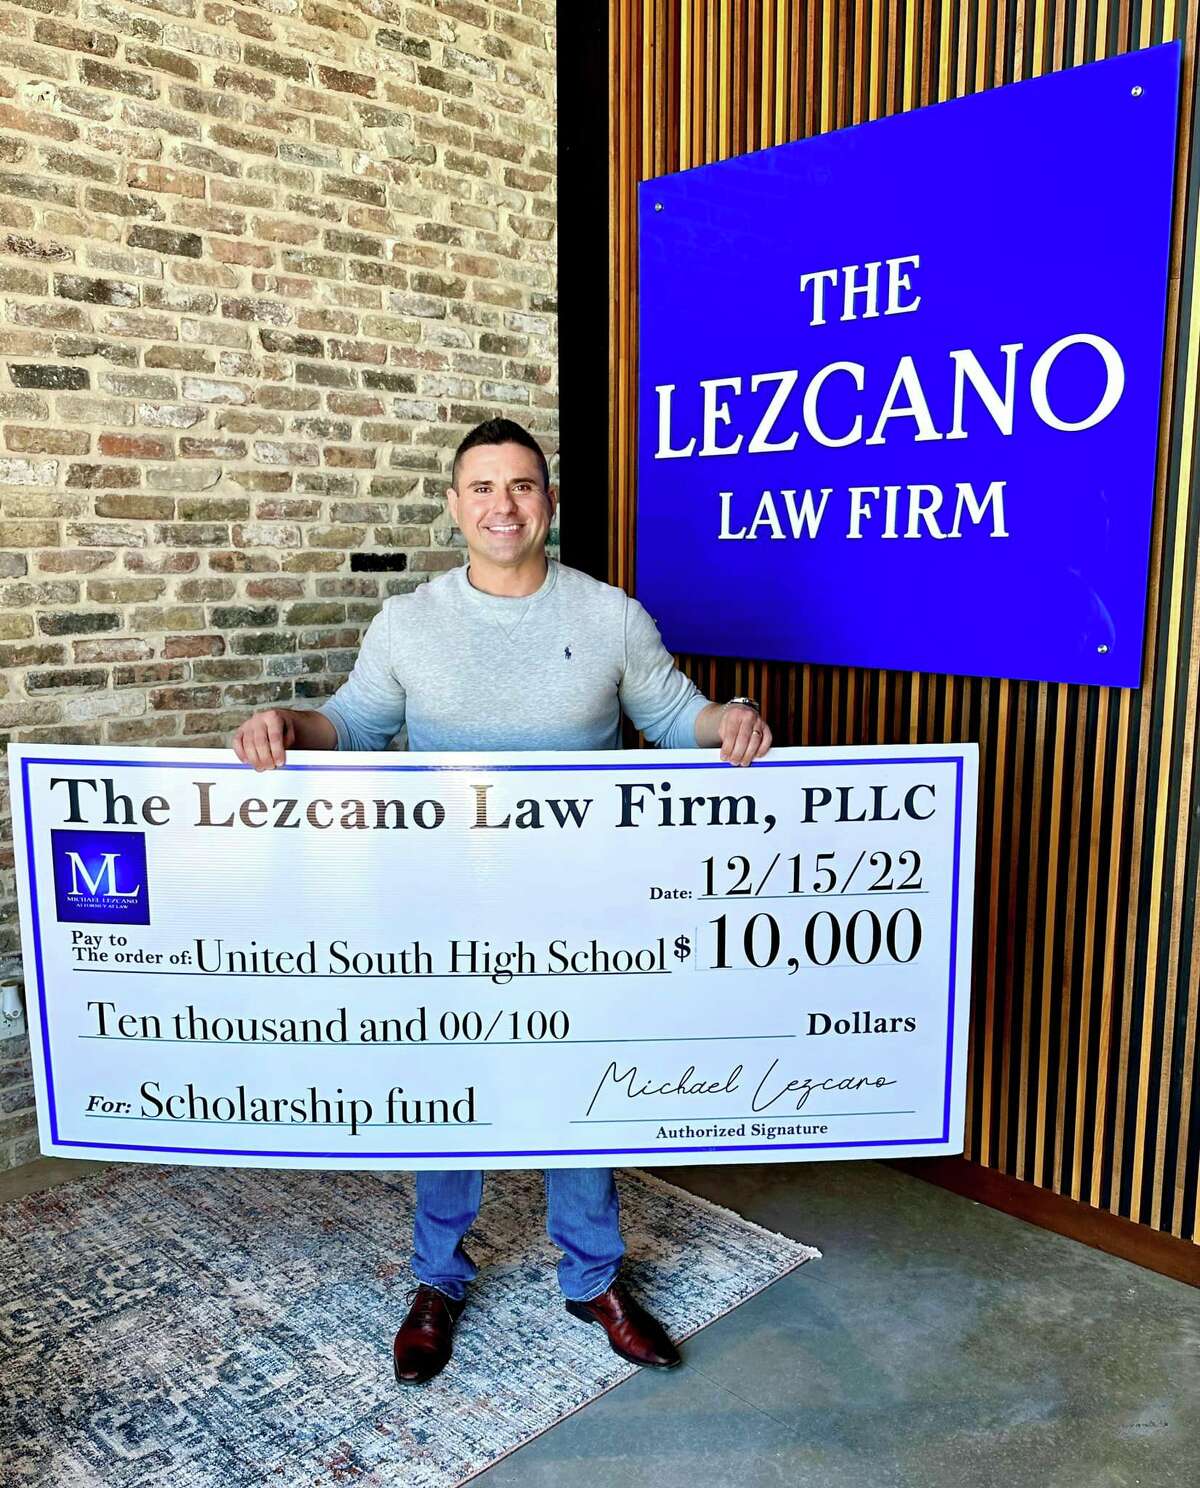 Michael Lezcano, of the Lezcano Law Firm, PLLC, a graduate from  United South High School, decided to give back to the high school he attended, creating a $10,000 scholarship fund for USHS students. 